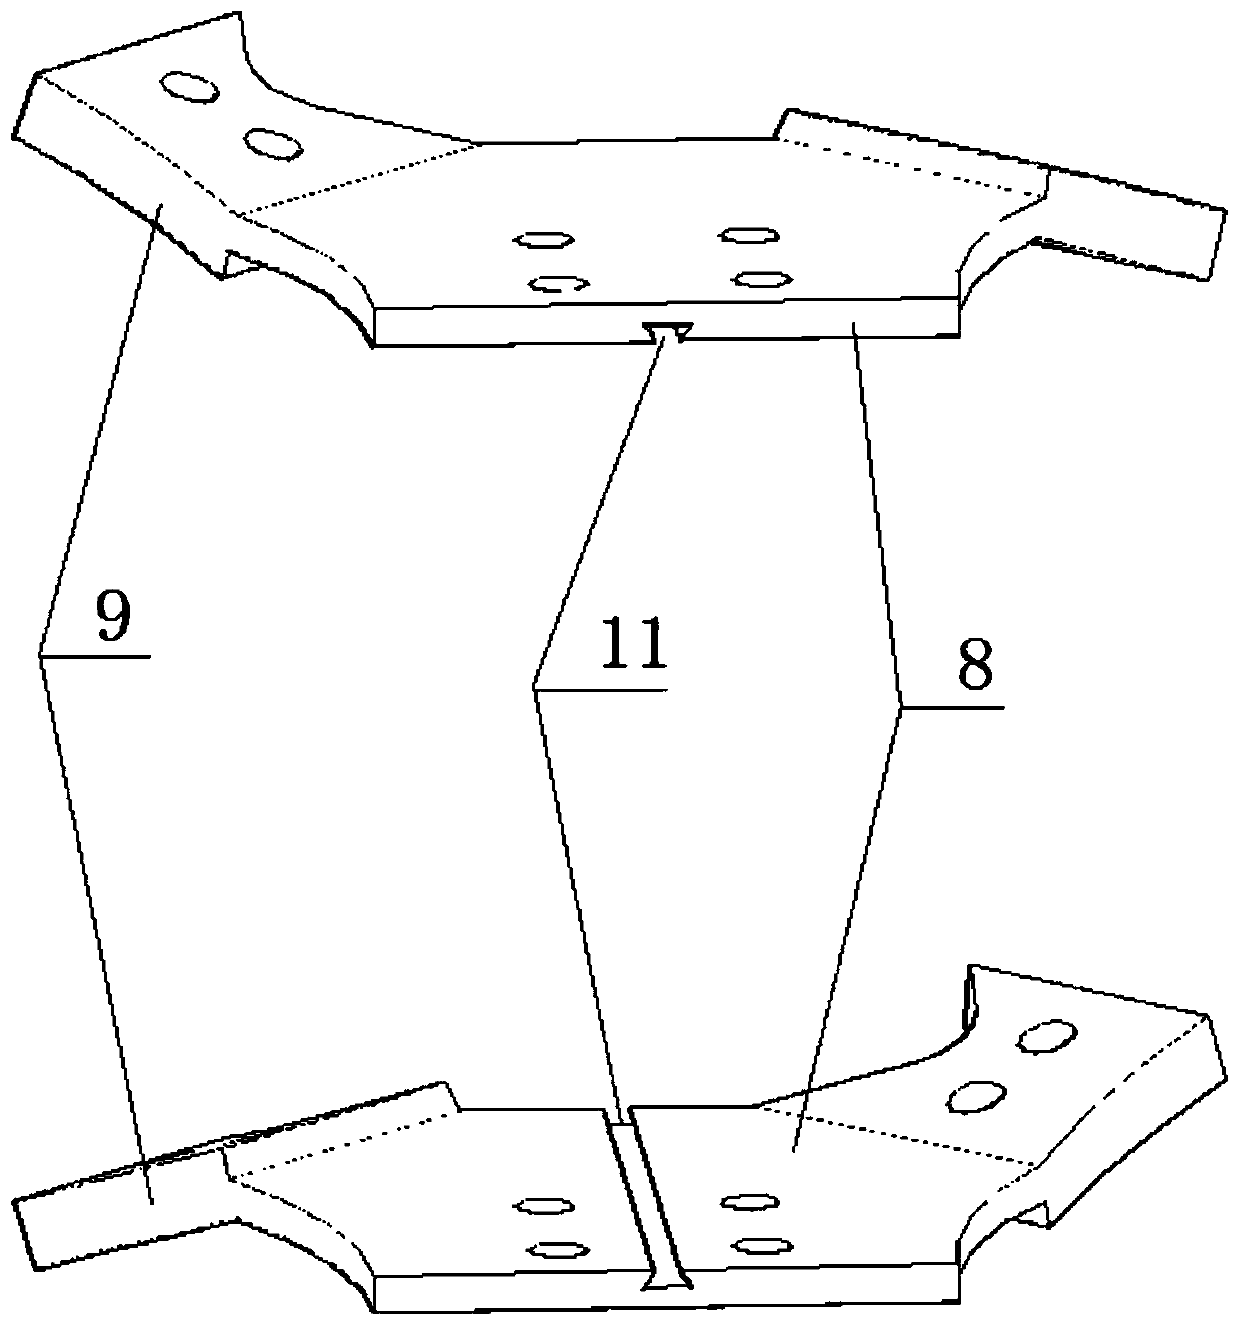 Fully assembled steel structure connection components and installation methods